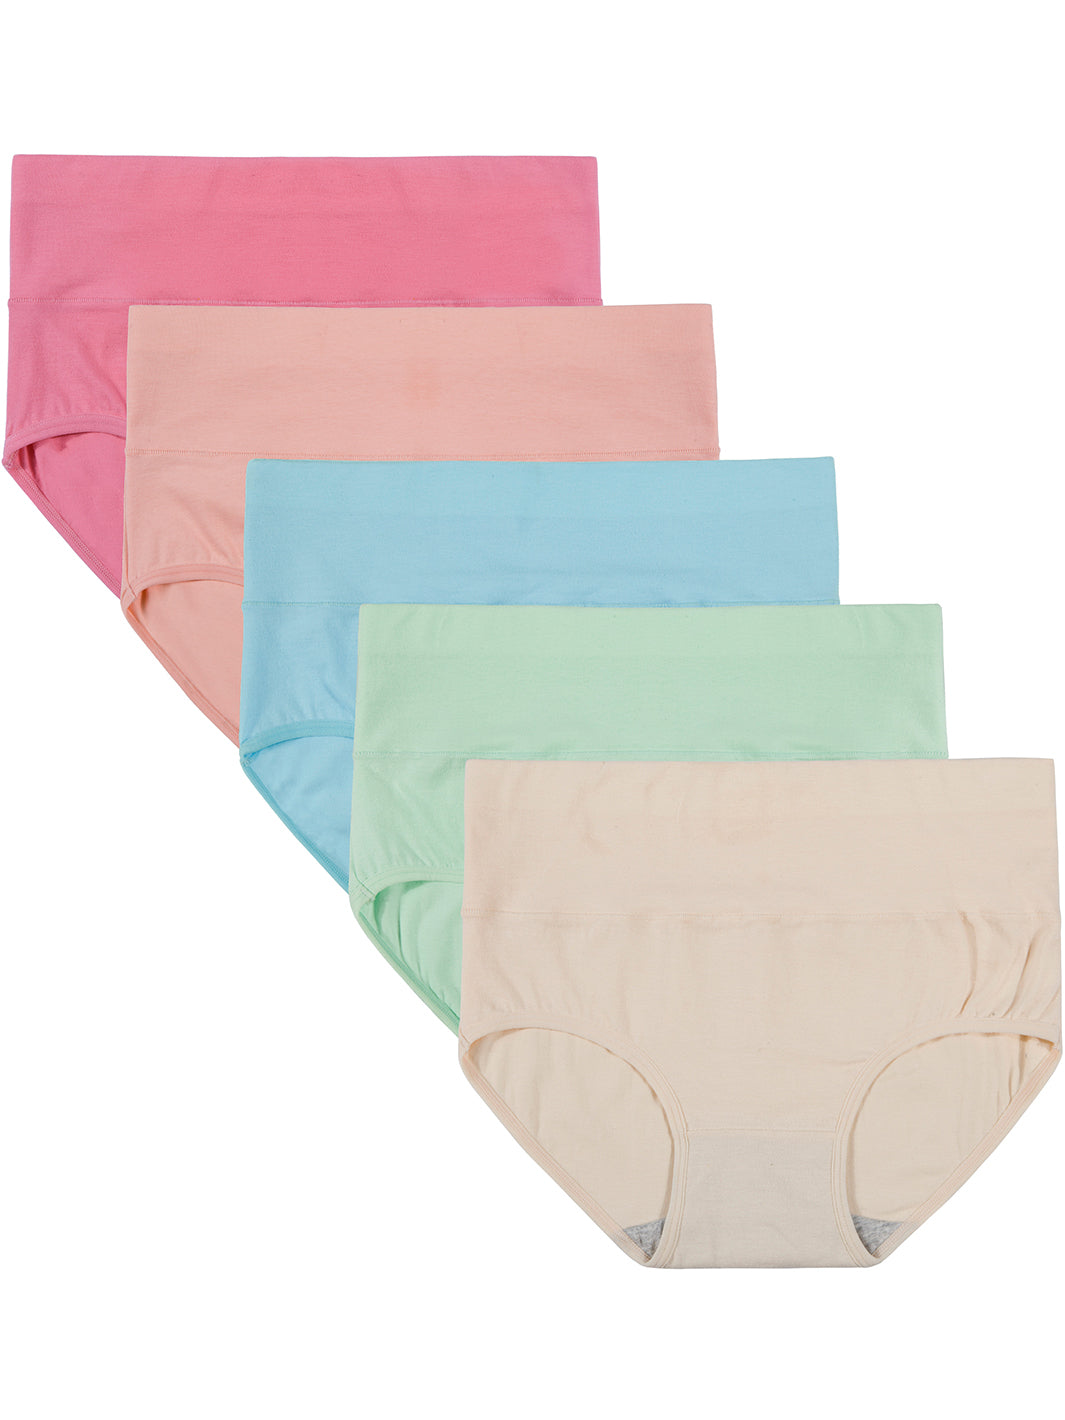 5 Pack Seamless Cotton Thong String Panties For Women Teenage Girls  Underwear, G Strigs, Small Size, Intimate Style 112nP5 230414 From Kong00,  $17.19